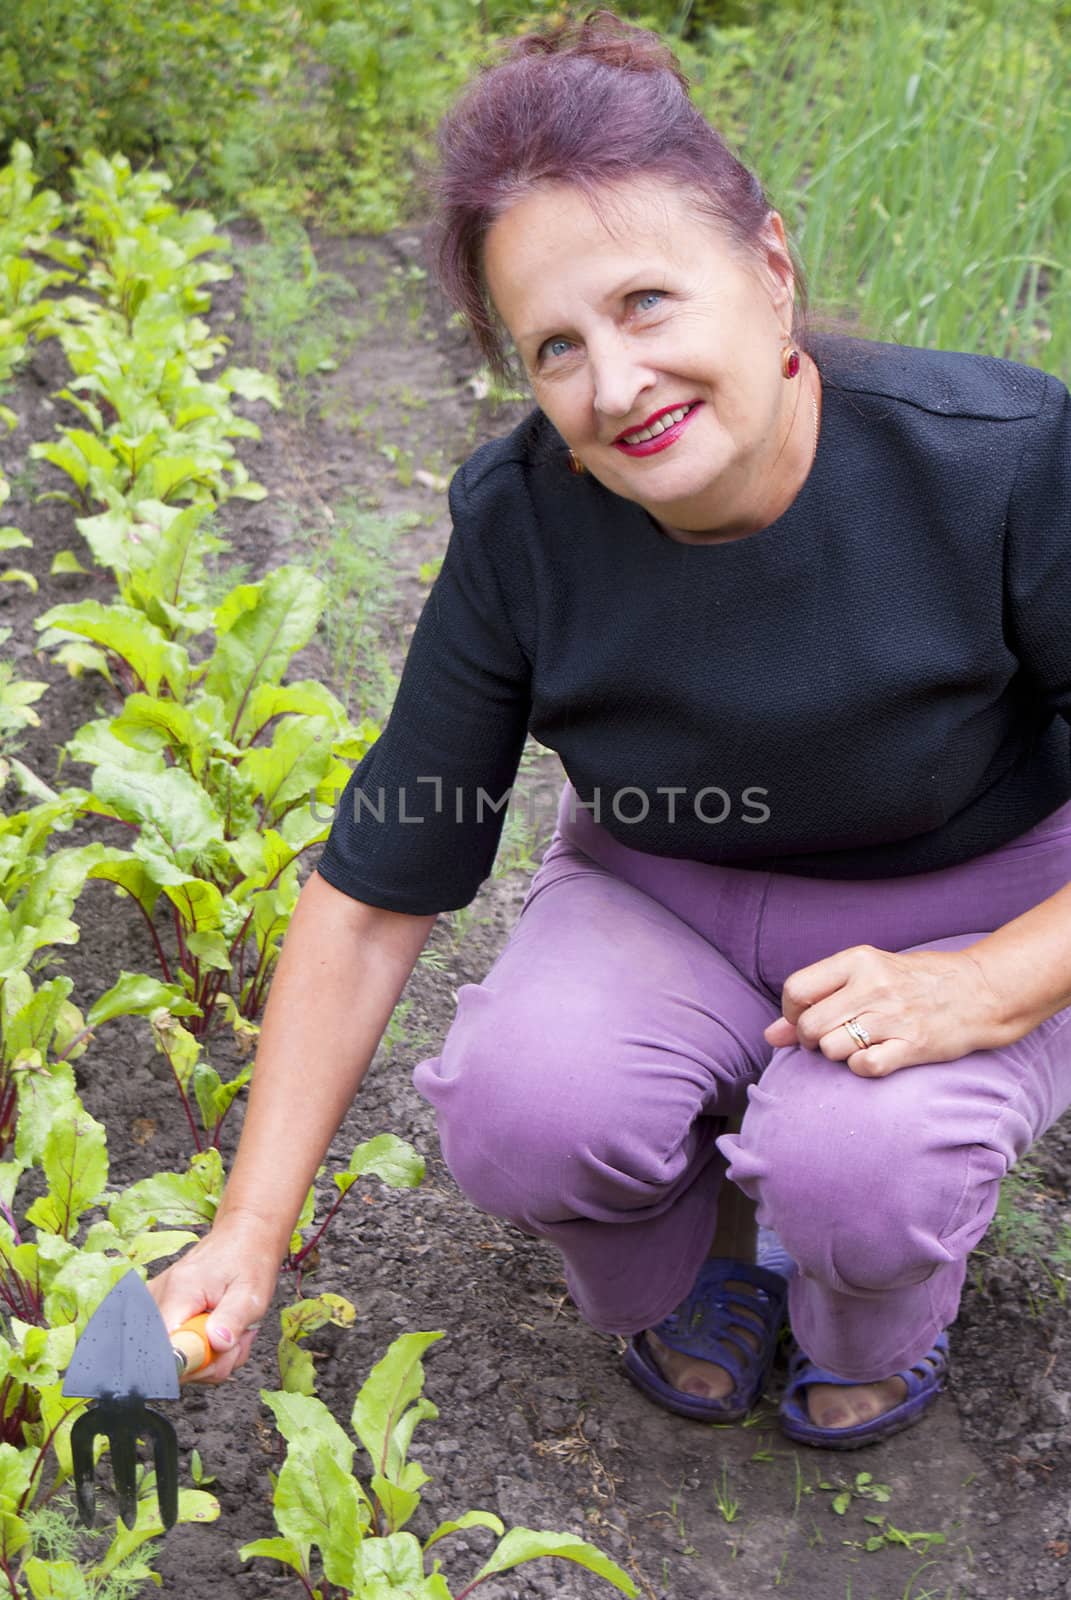 The happy smiling woman works on a garden site by sergey150770SV